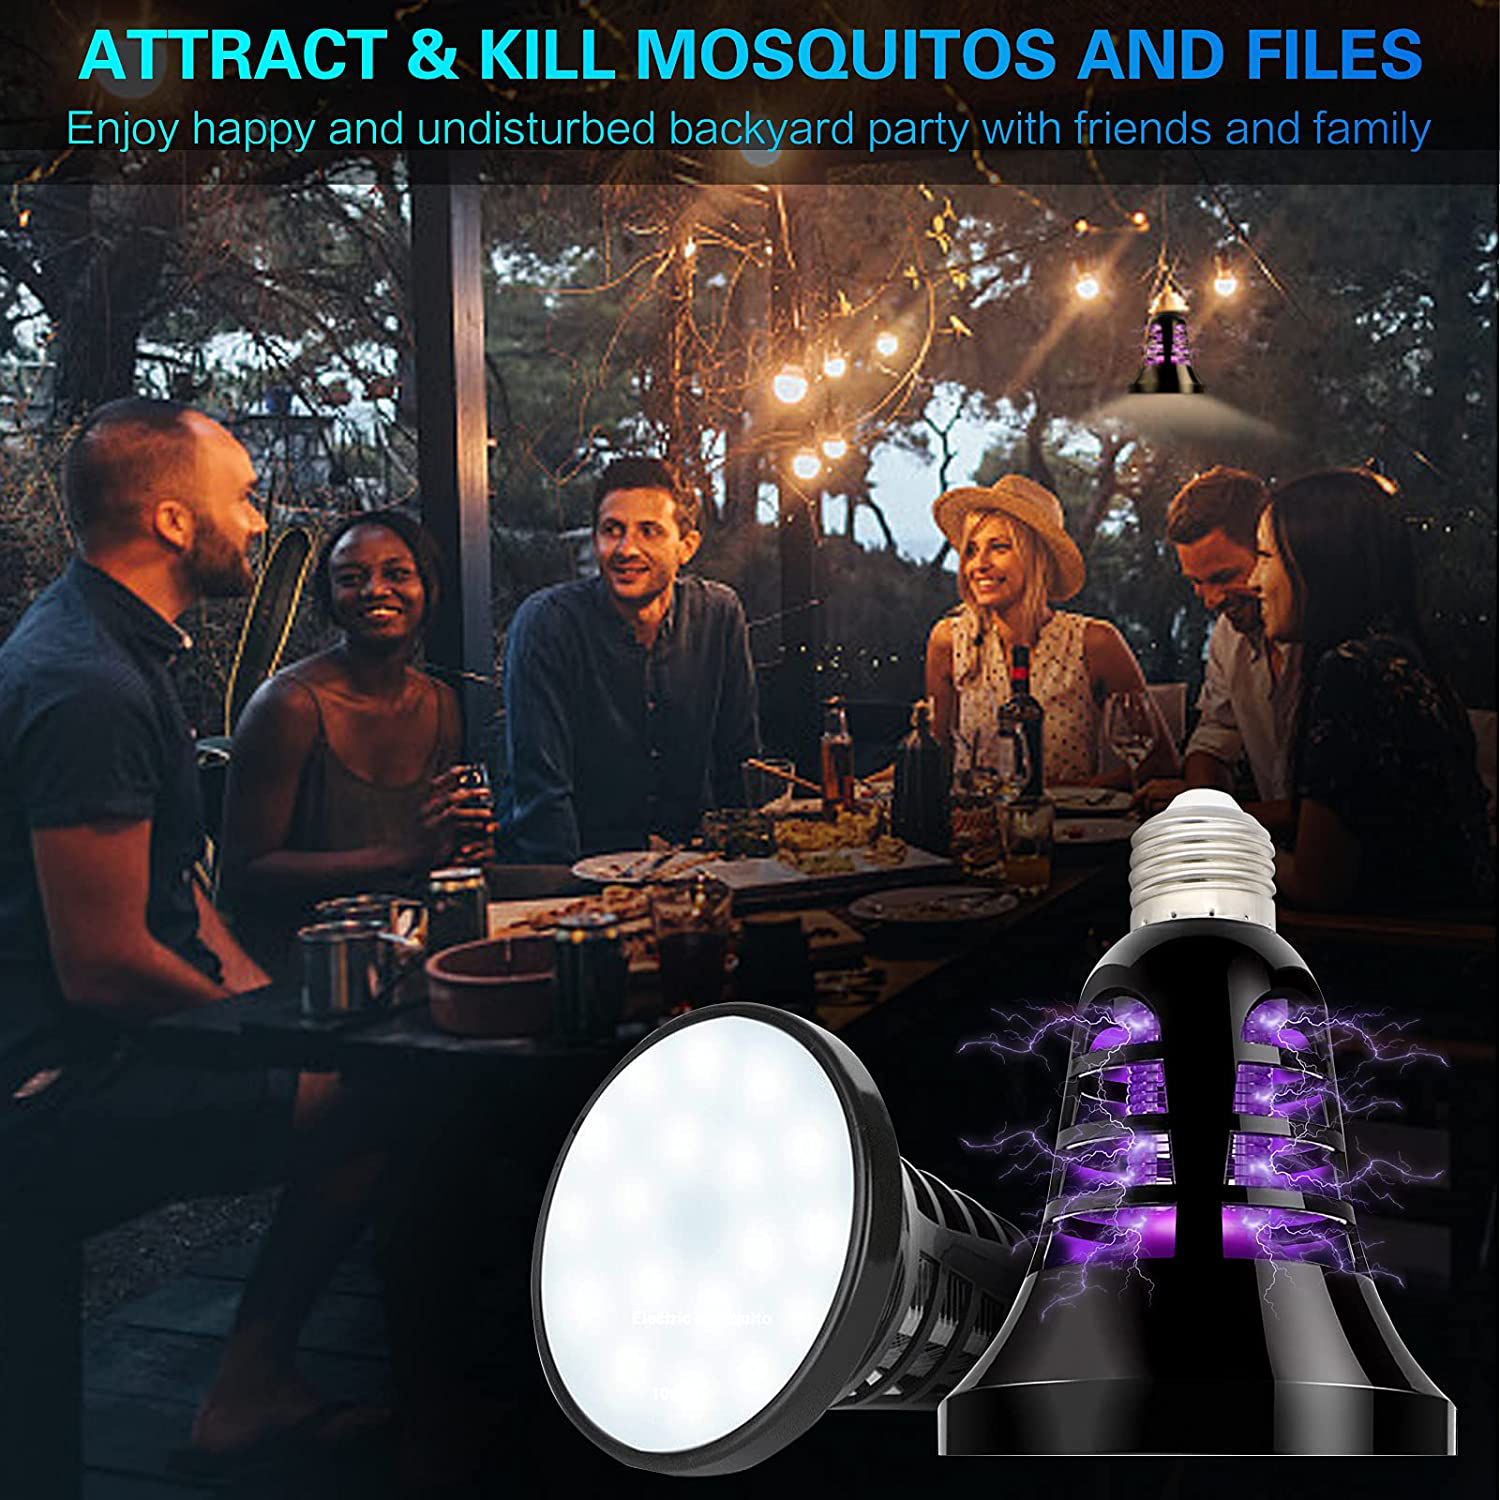 COZYLIFE 2-in-1 Bug Zapper Light Bulb, Outdoor Camping Lamp, USB Powered Tent Lantern with Hanging Hook, UV LED Insect Mosquito Fly Trap Killer Bulb Portable, Comes with Cleaning Brush and USB Cable